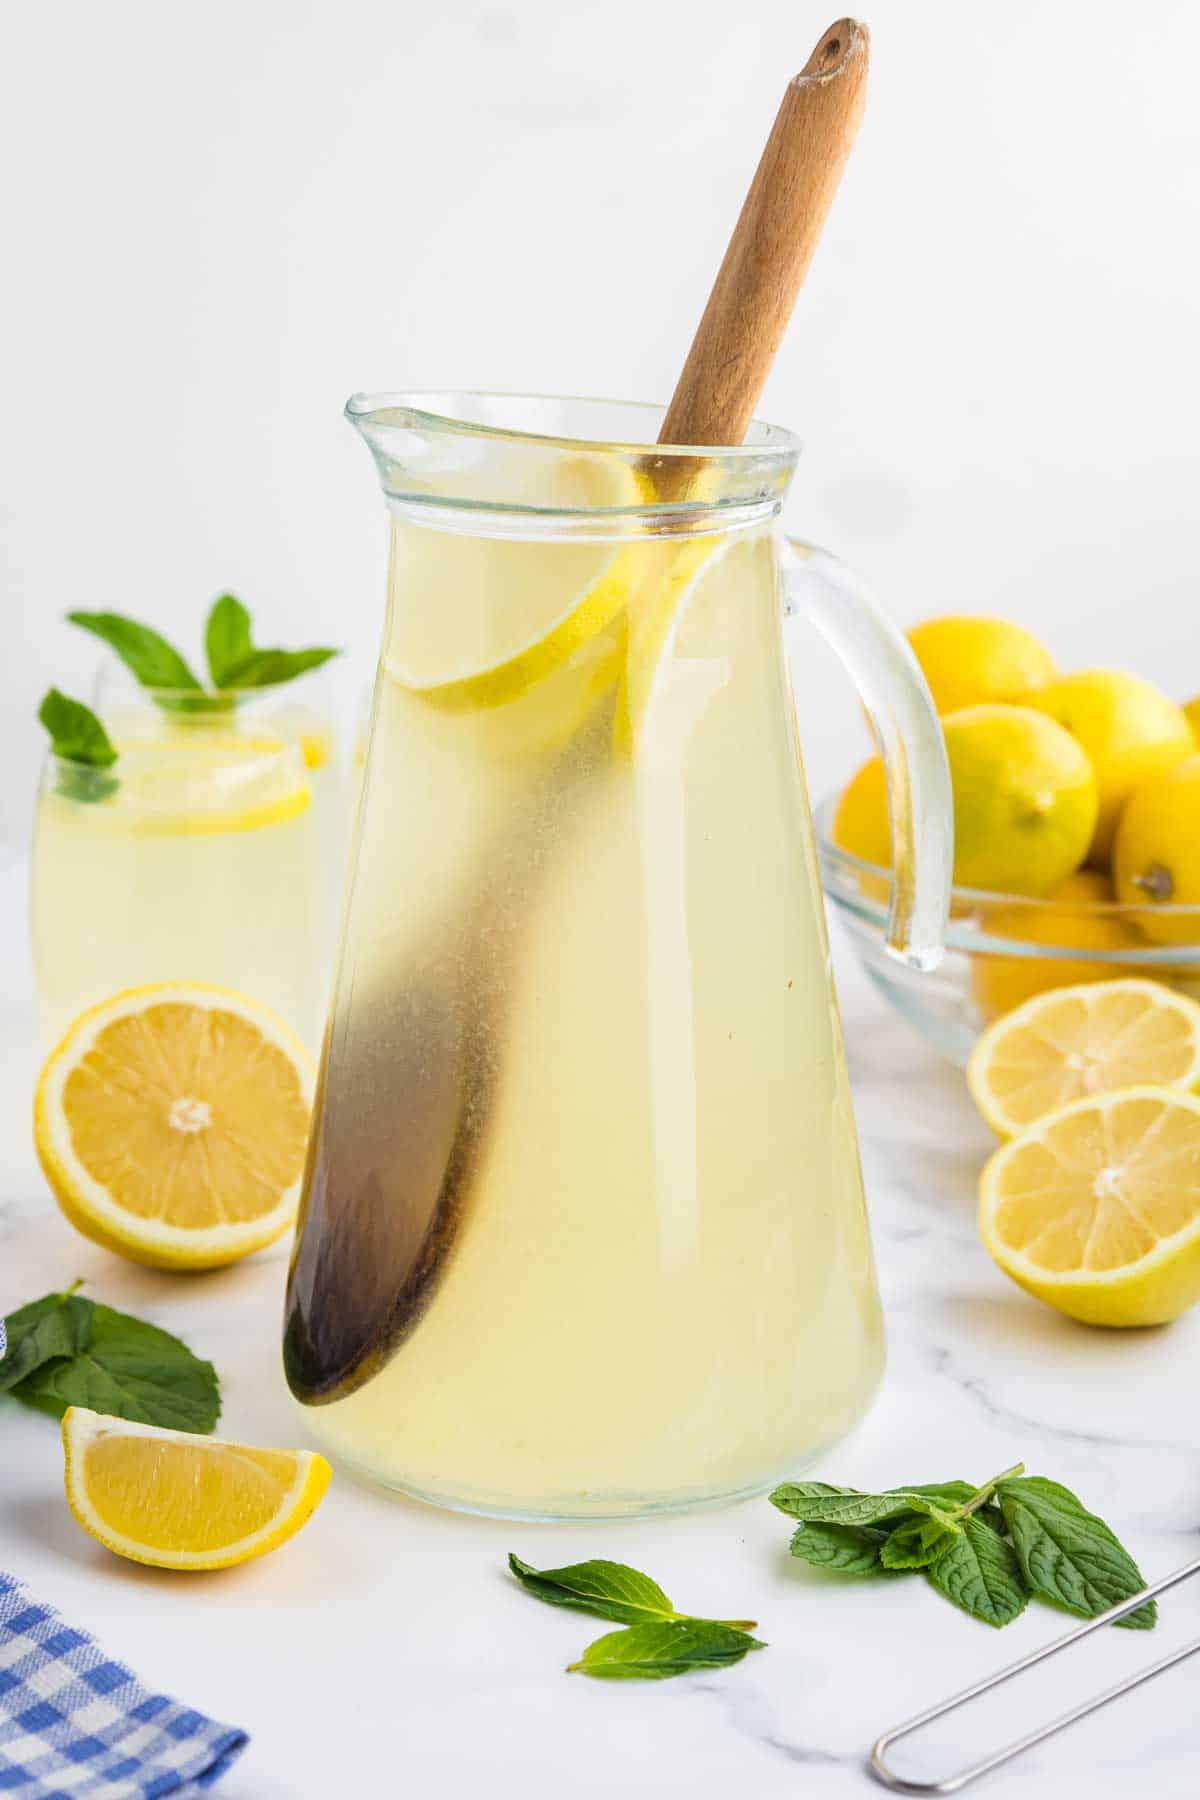 A pitcher of lemonade with lemon slices and a wooden stirrer, accompanied by a bowl of lemons and mint leaves.